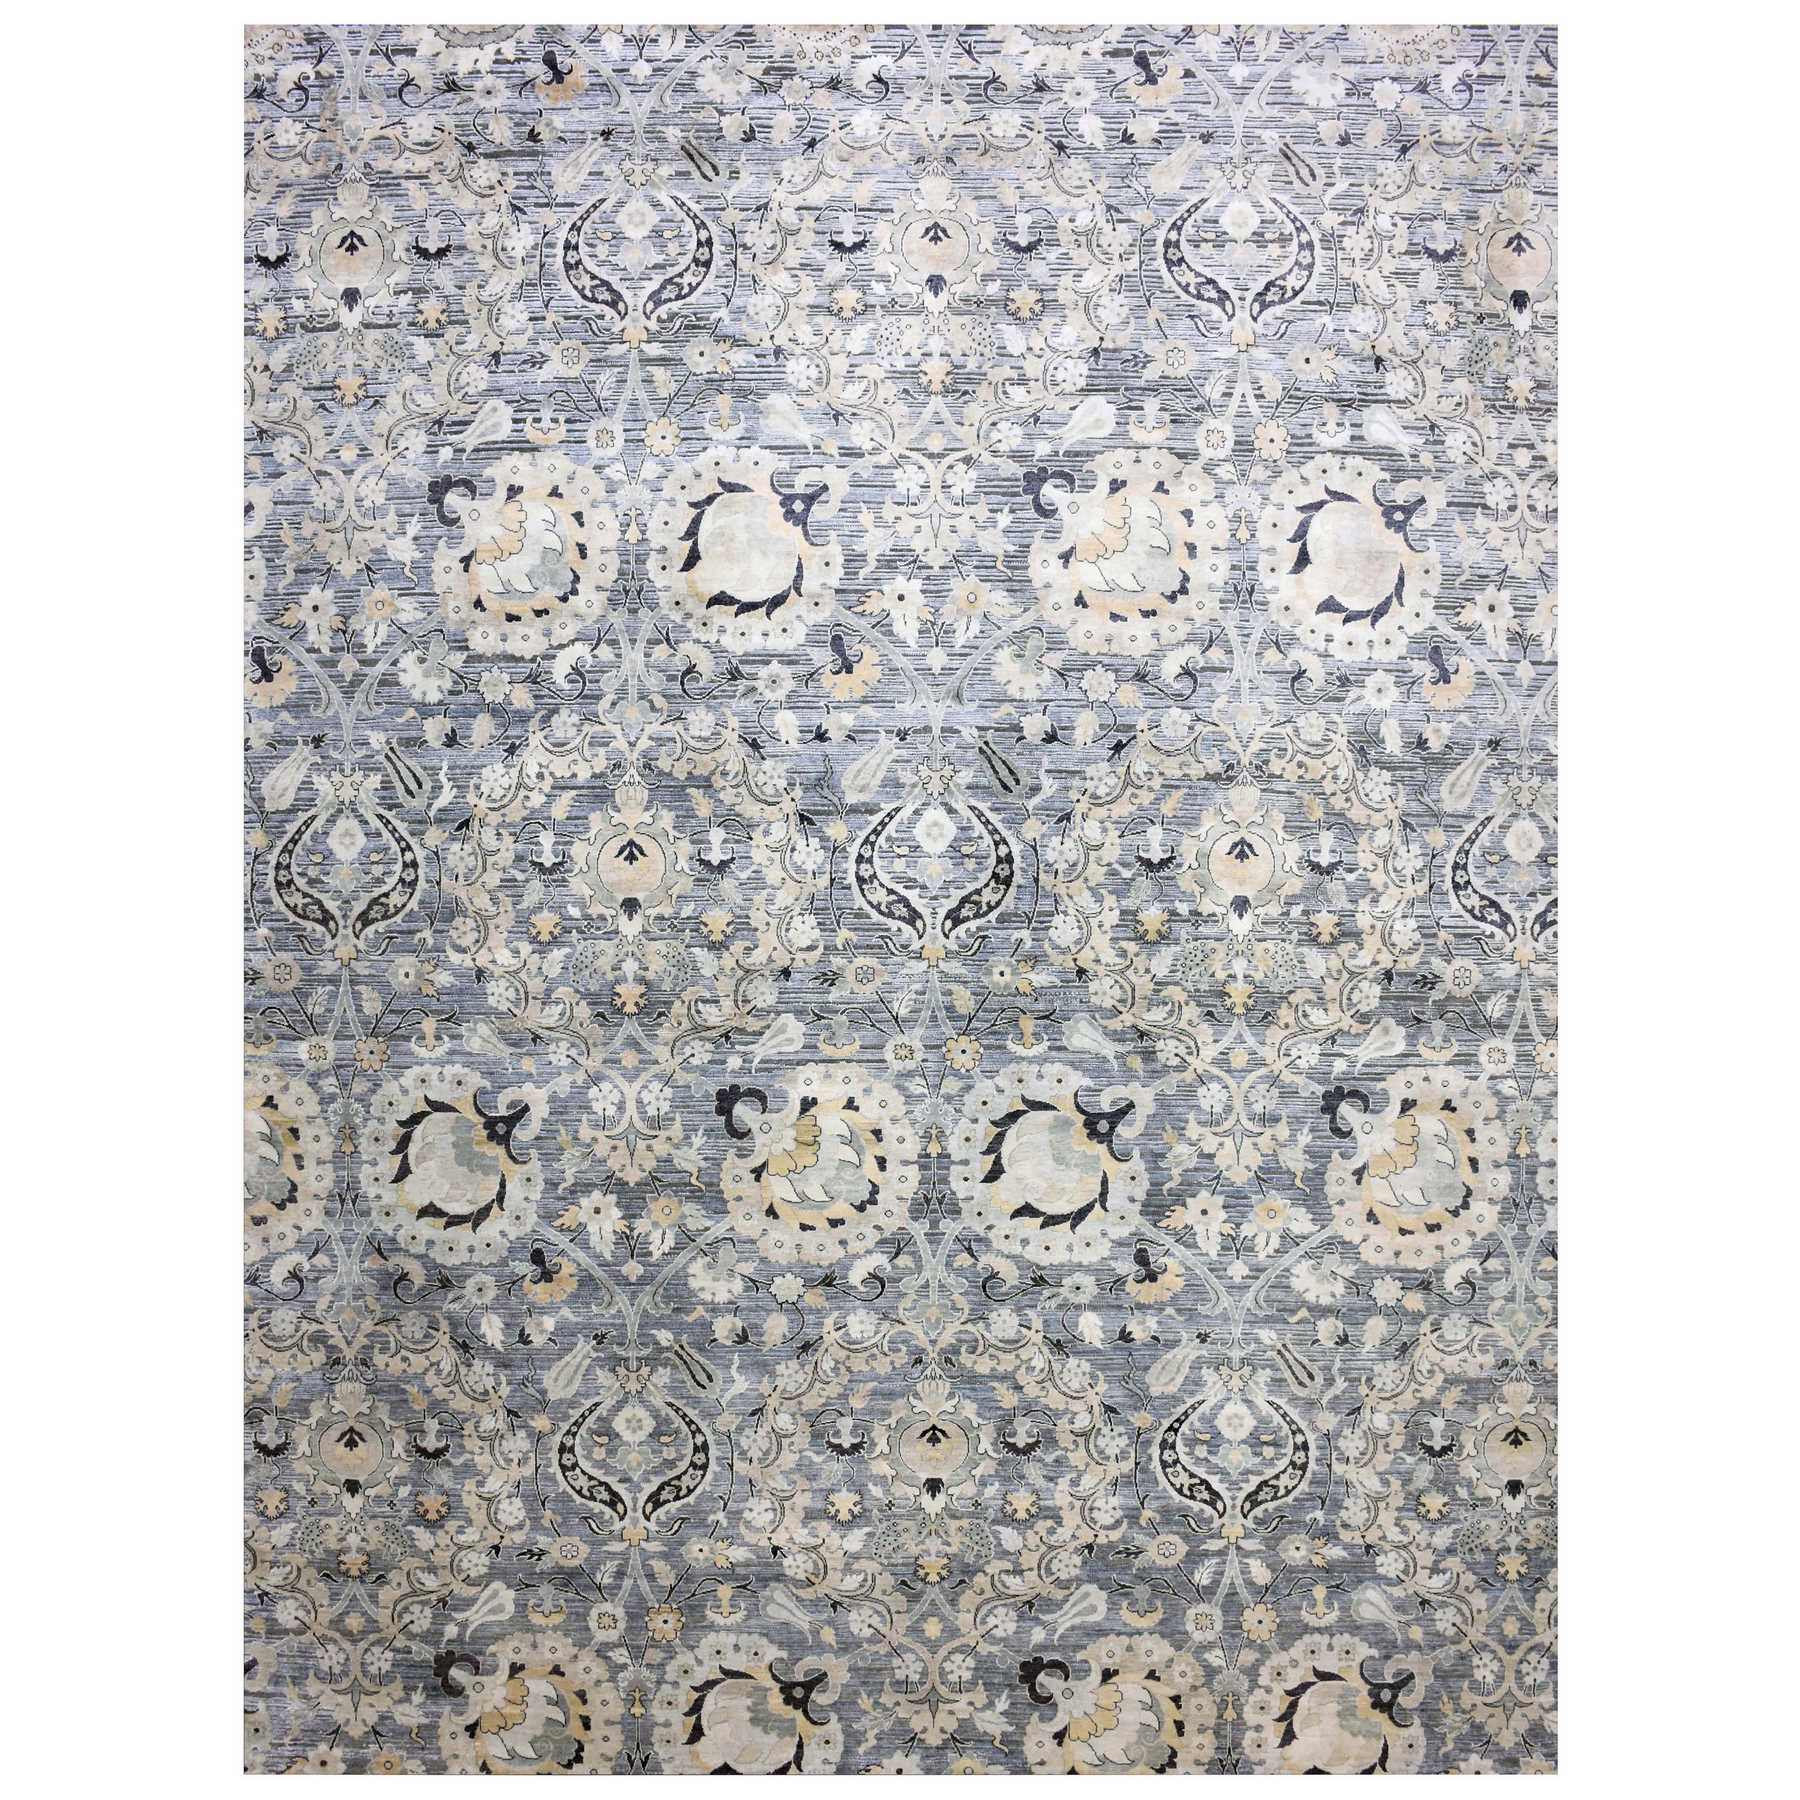 Wool and Silk Rugs LUV676053